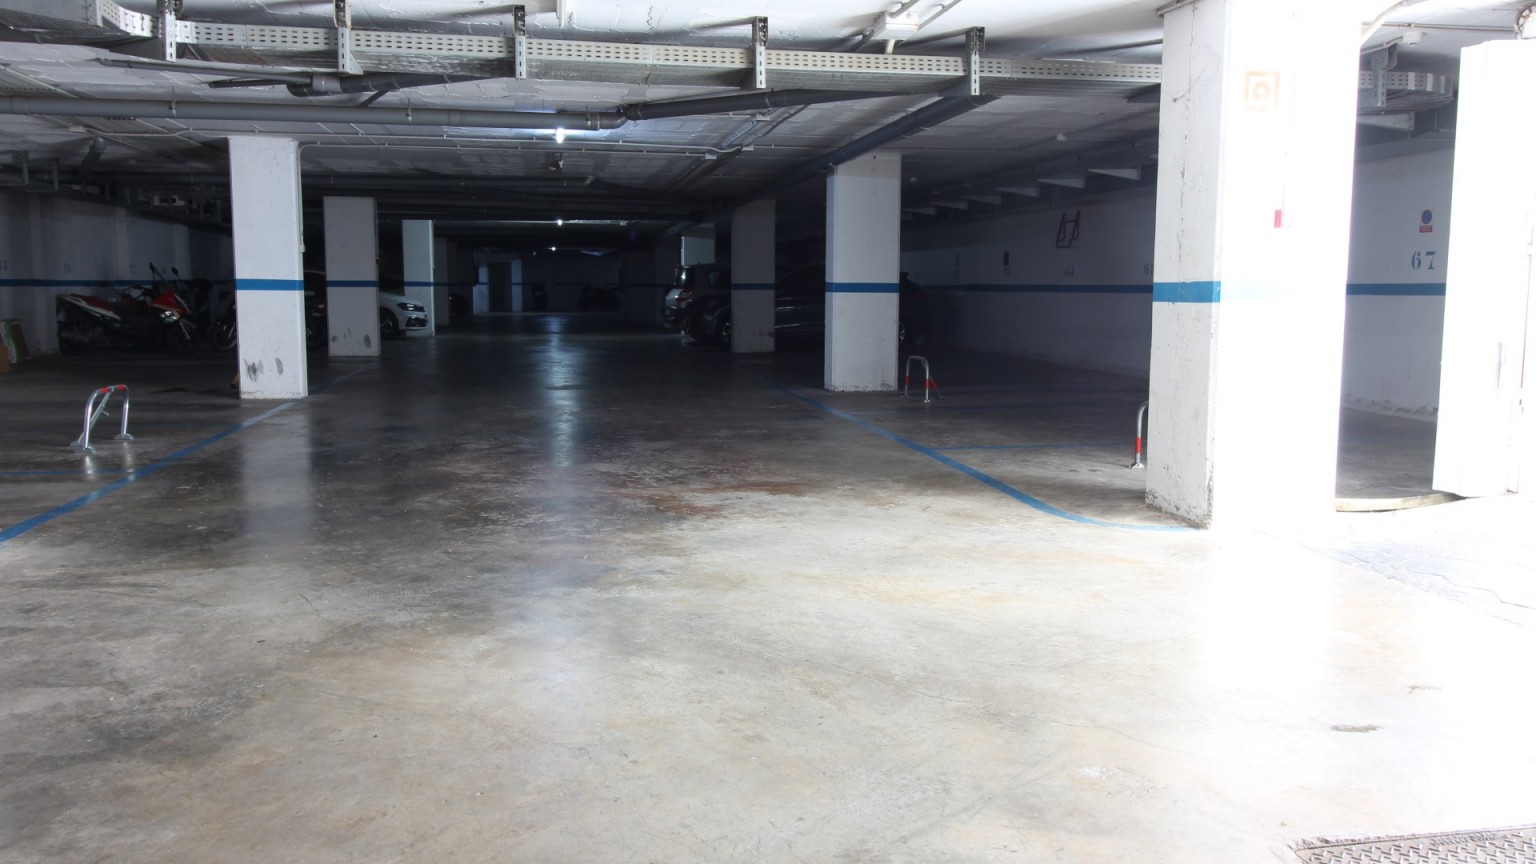 Underground parking space for sale in a residential in Santa Margarita.